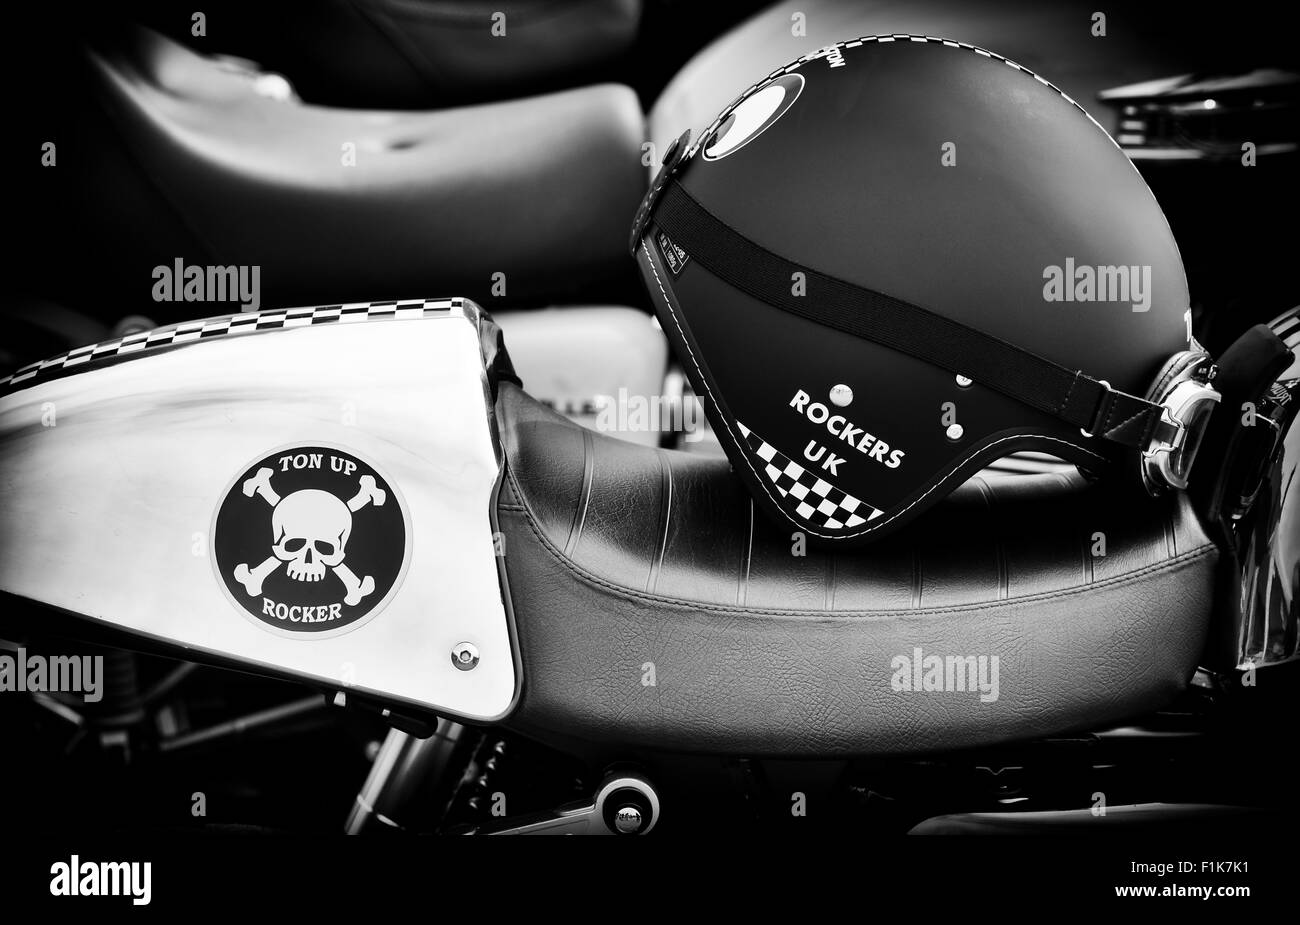 Rockers helmet and Motorcycle at the Ton up Day, Jacks Hill Cafe, Towcester, Northamptonshire, England. Monochrome Stock Photo